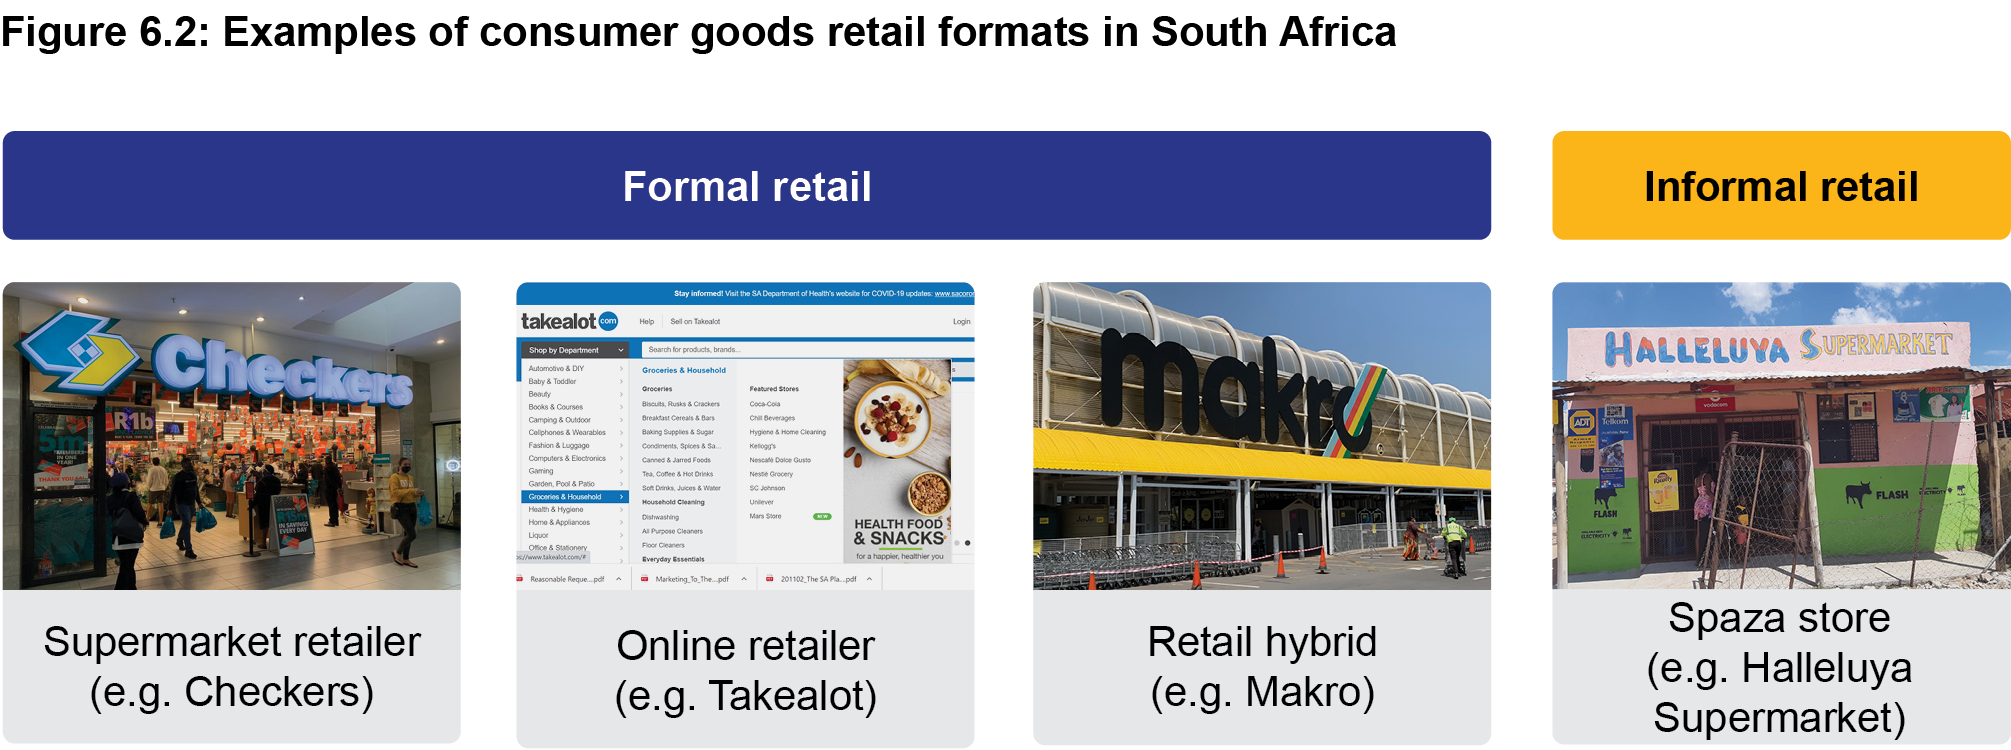 Figure 6.2: Examples of consumer goods retail formats in South Africa